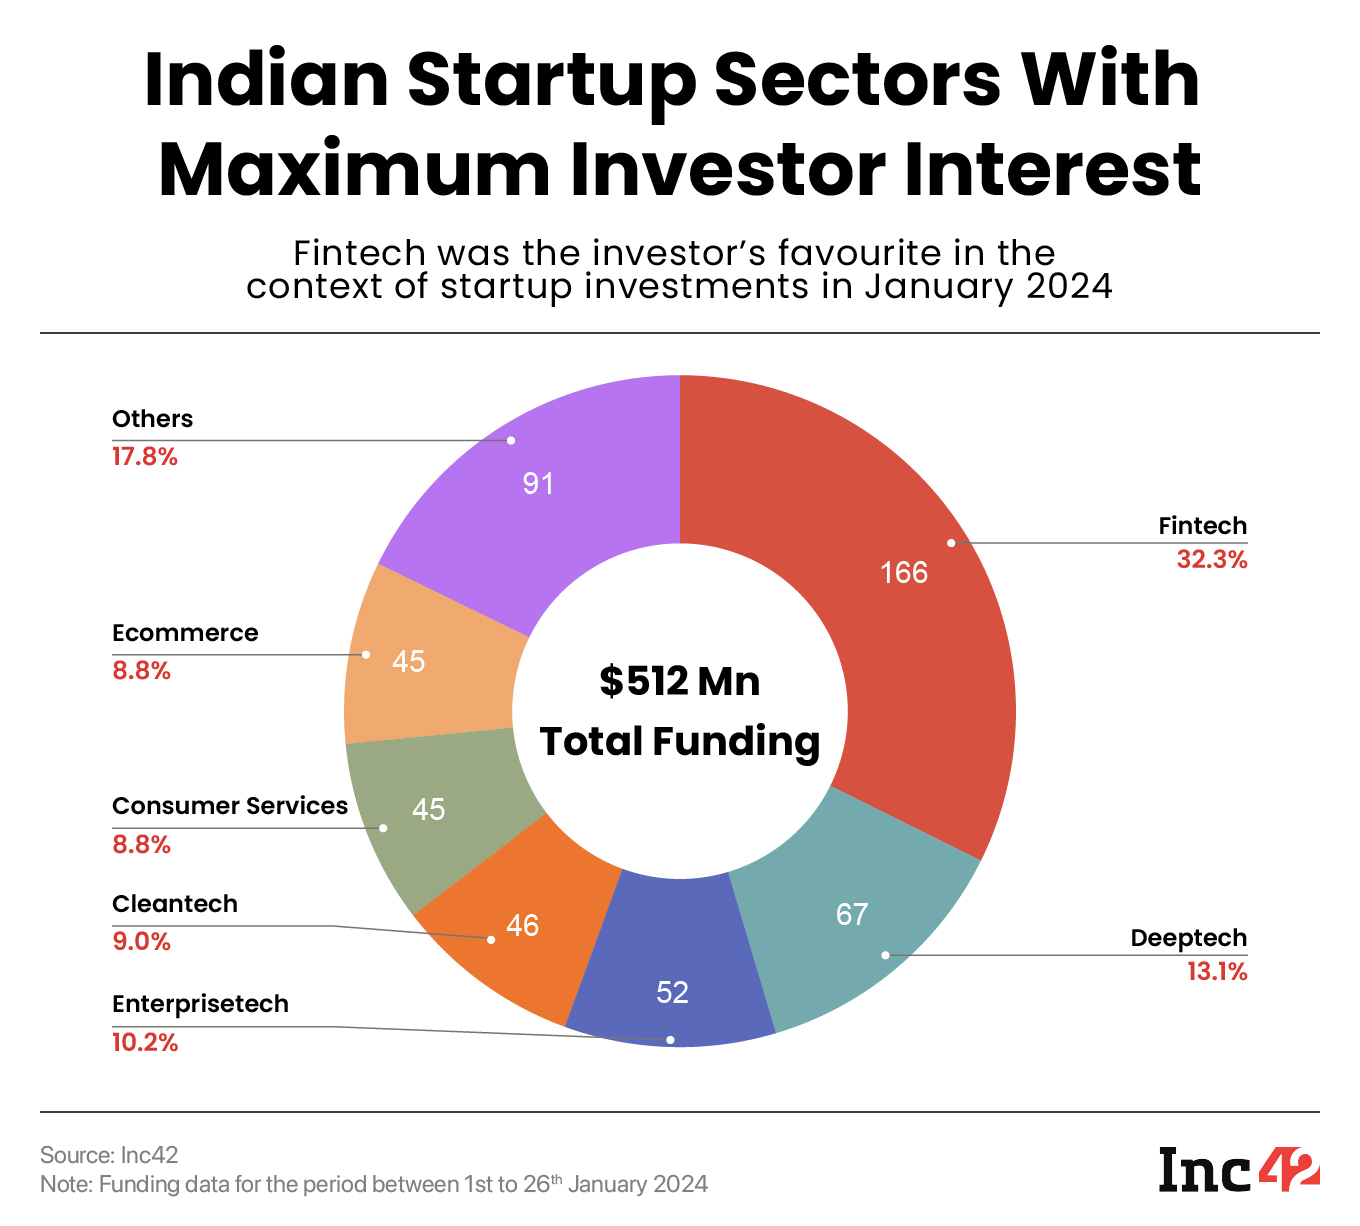 Indian startup sectors with maximum investor interest